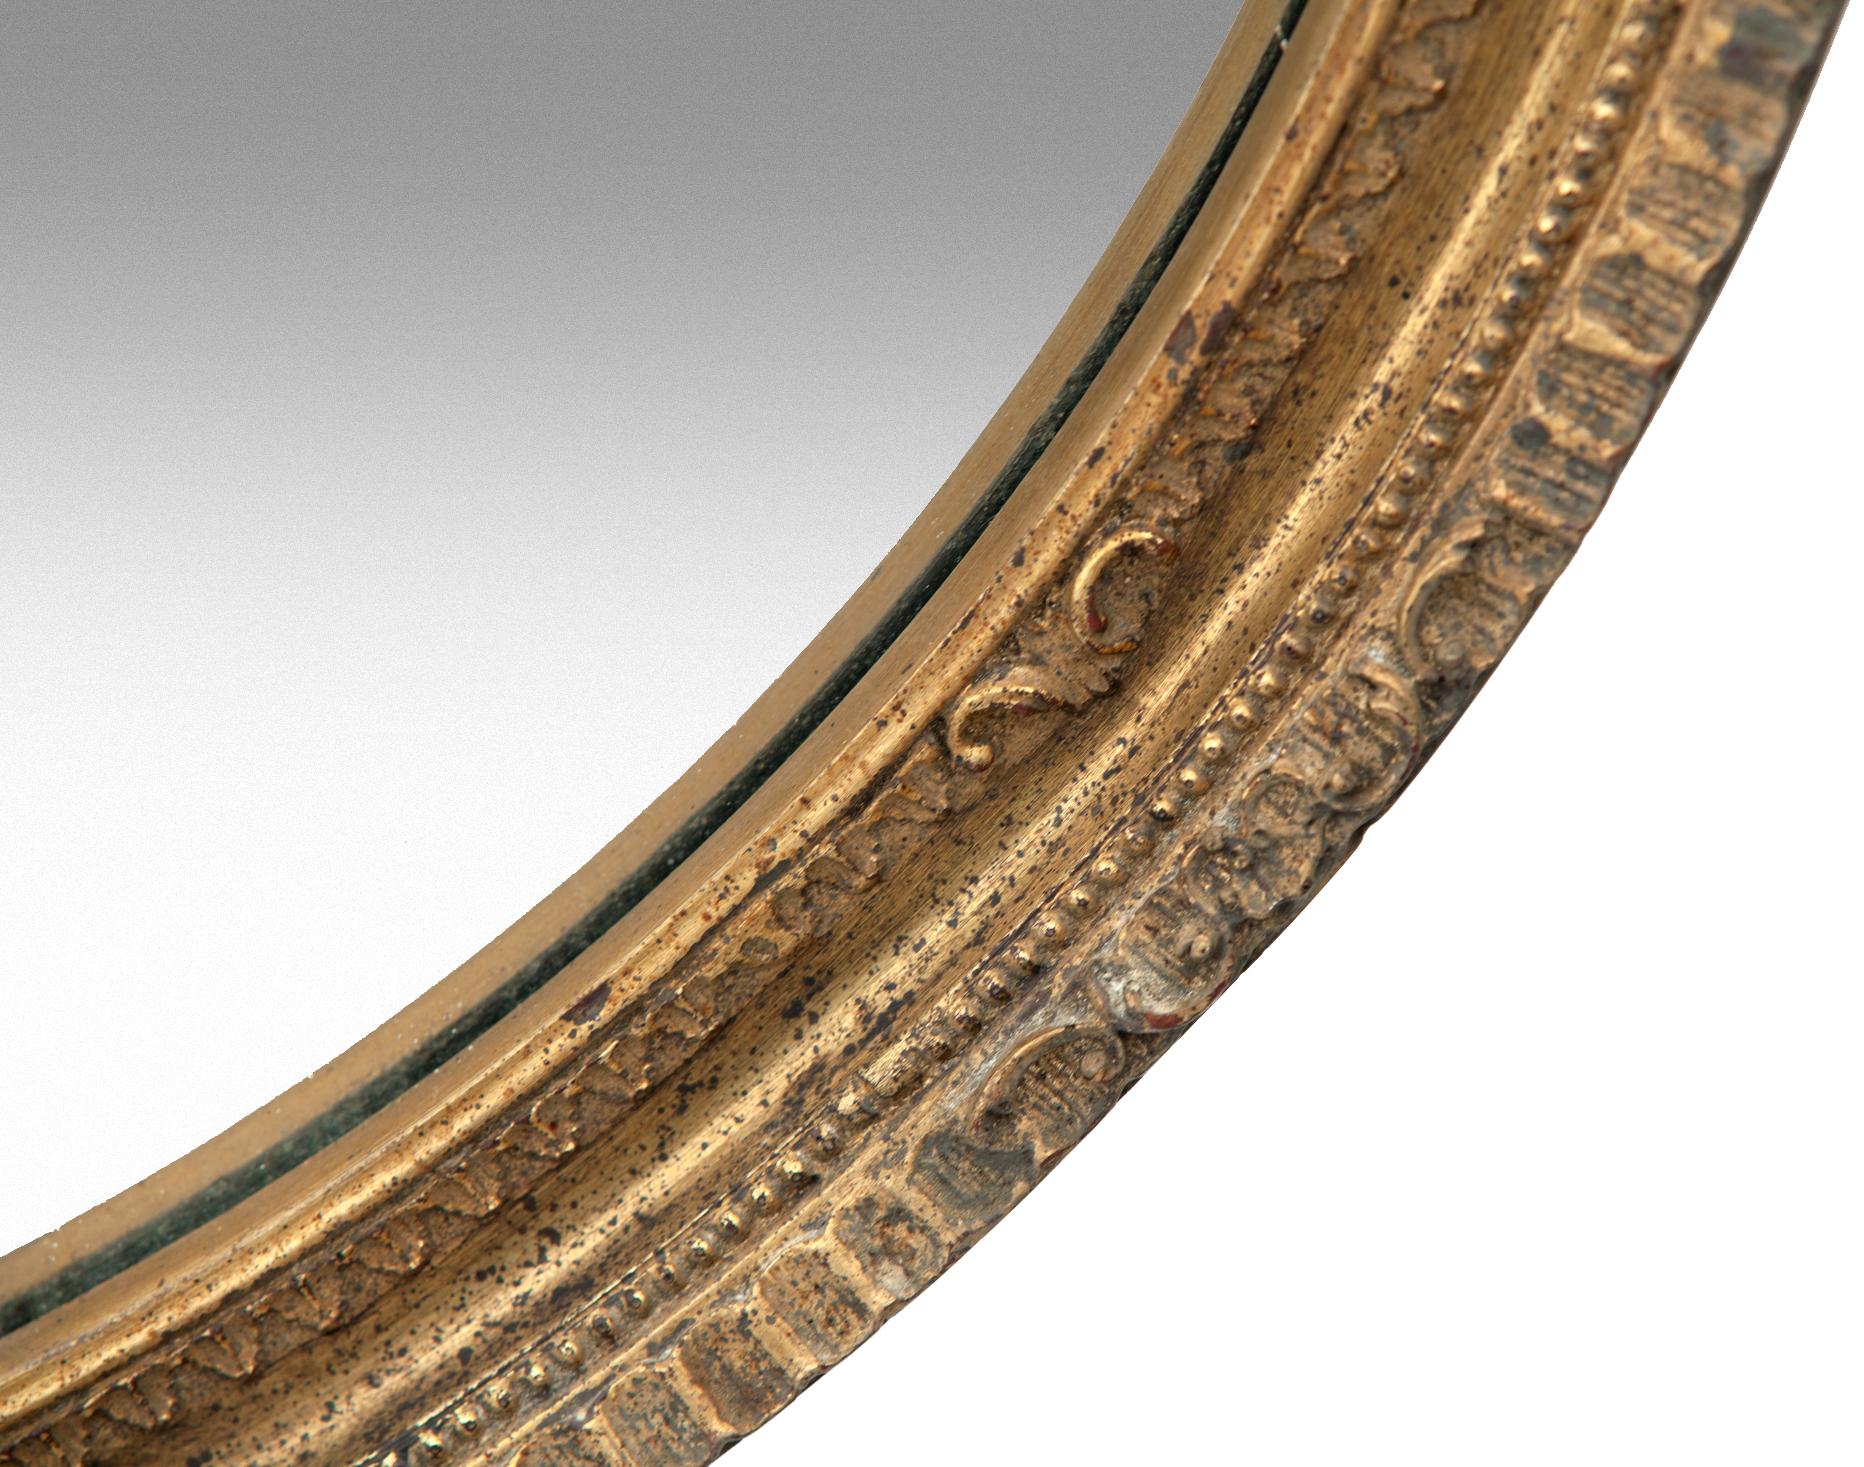 Midcentury round European gold framed mirror/ a ruffled edge.
This stunning frame is really quite simple, with a shallow ruffled edge & a petite inner frame finished in both light & dark gold.
